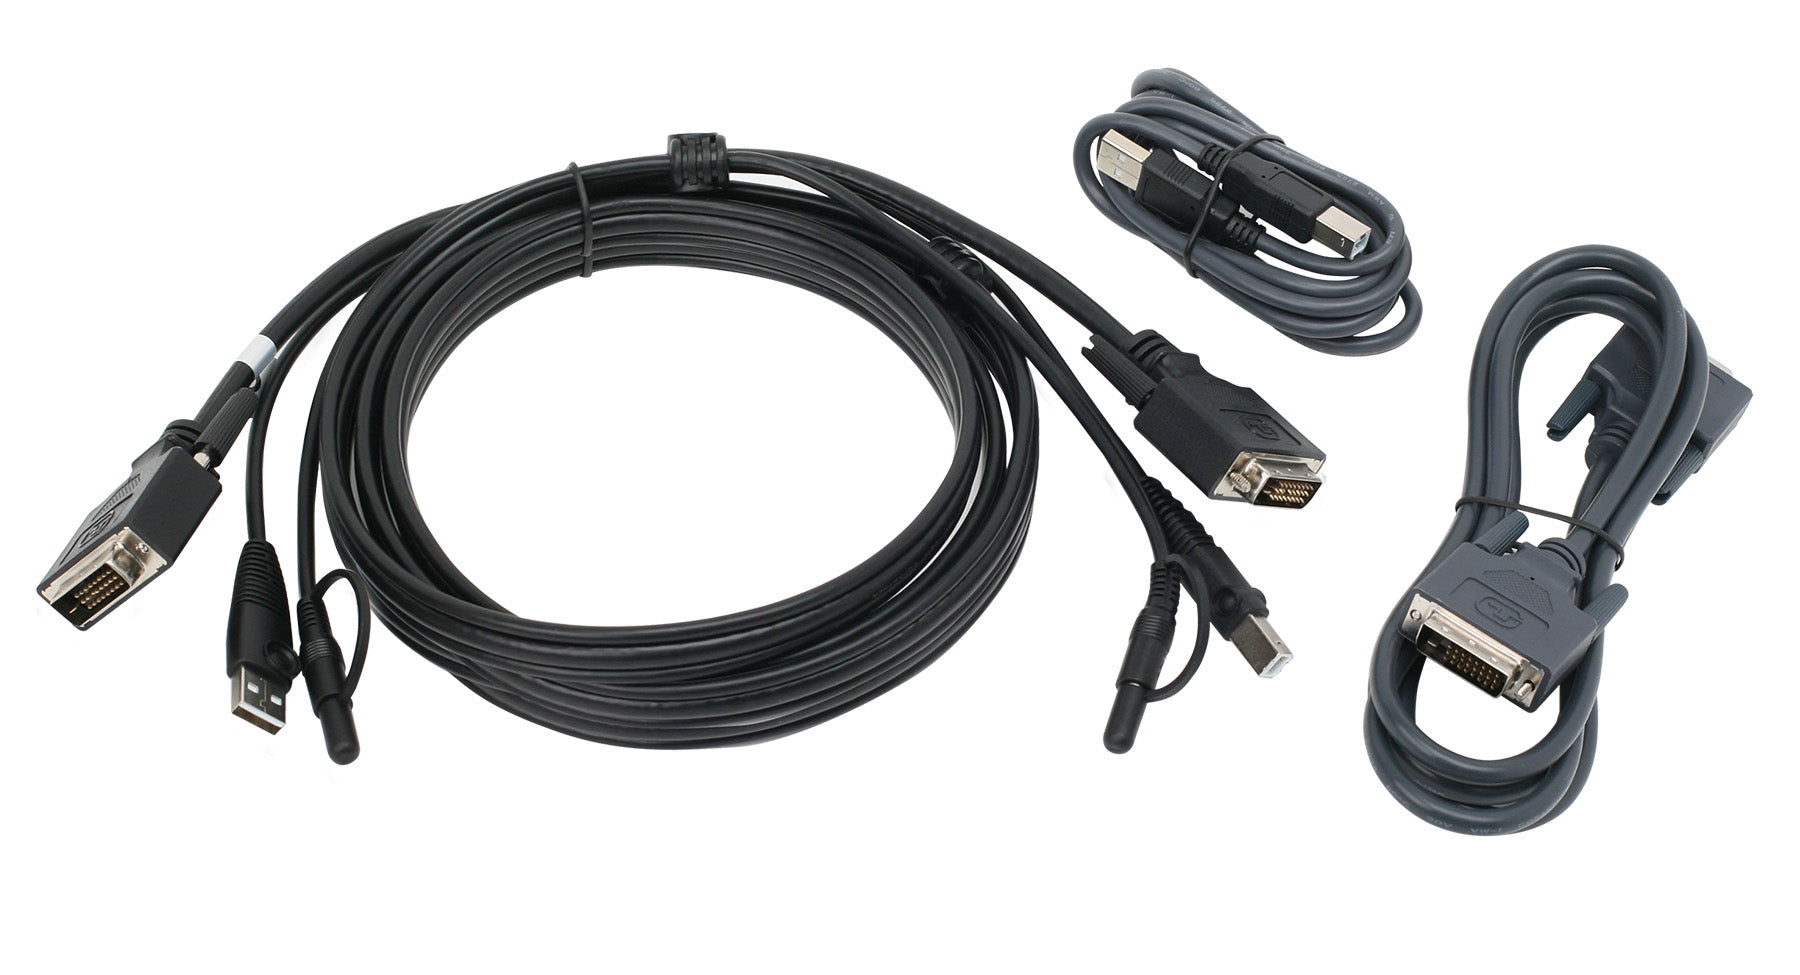 10 ft. Dual View DVI, USB KVM Cable Kit with Audio (TAA)